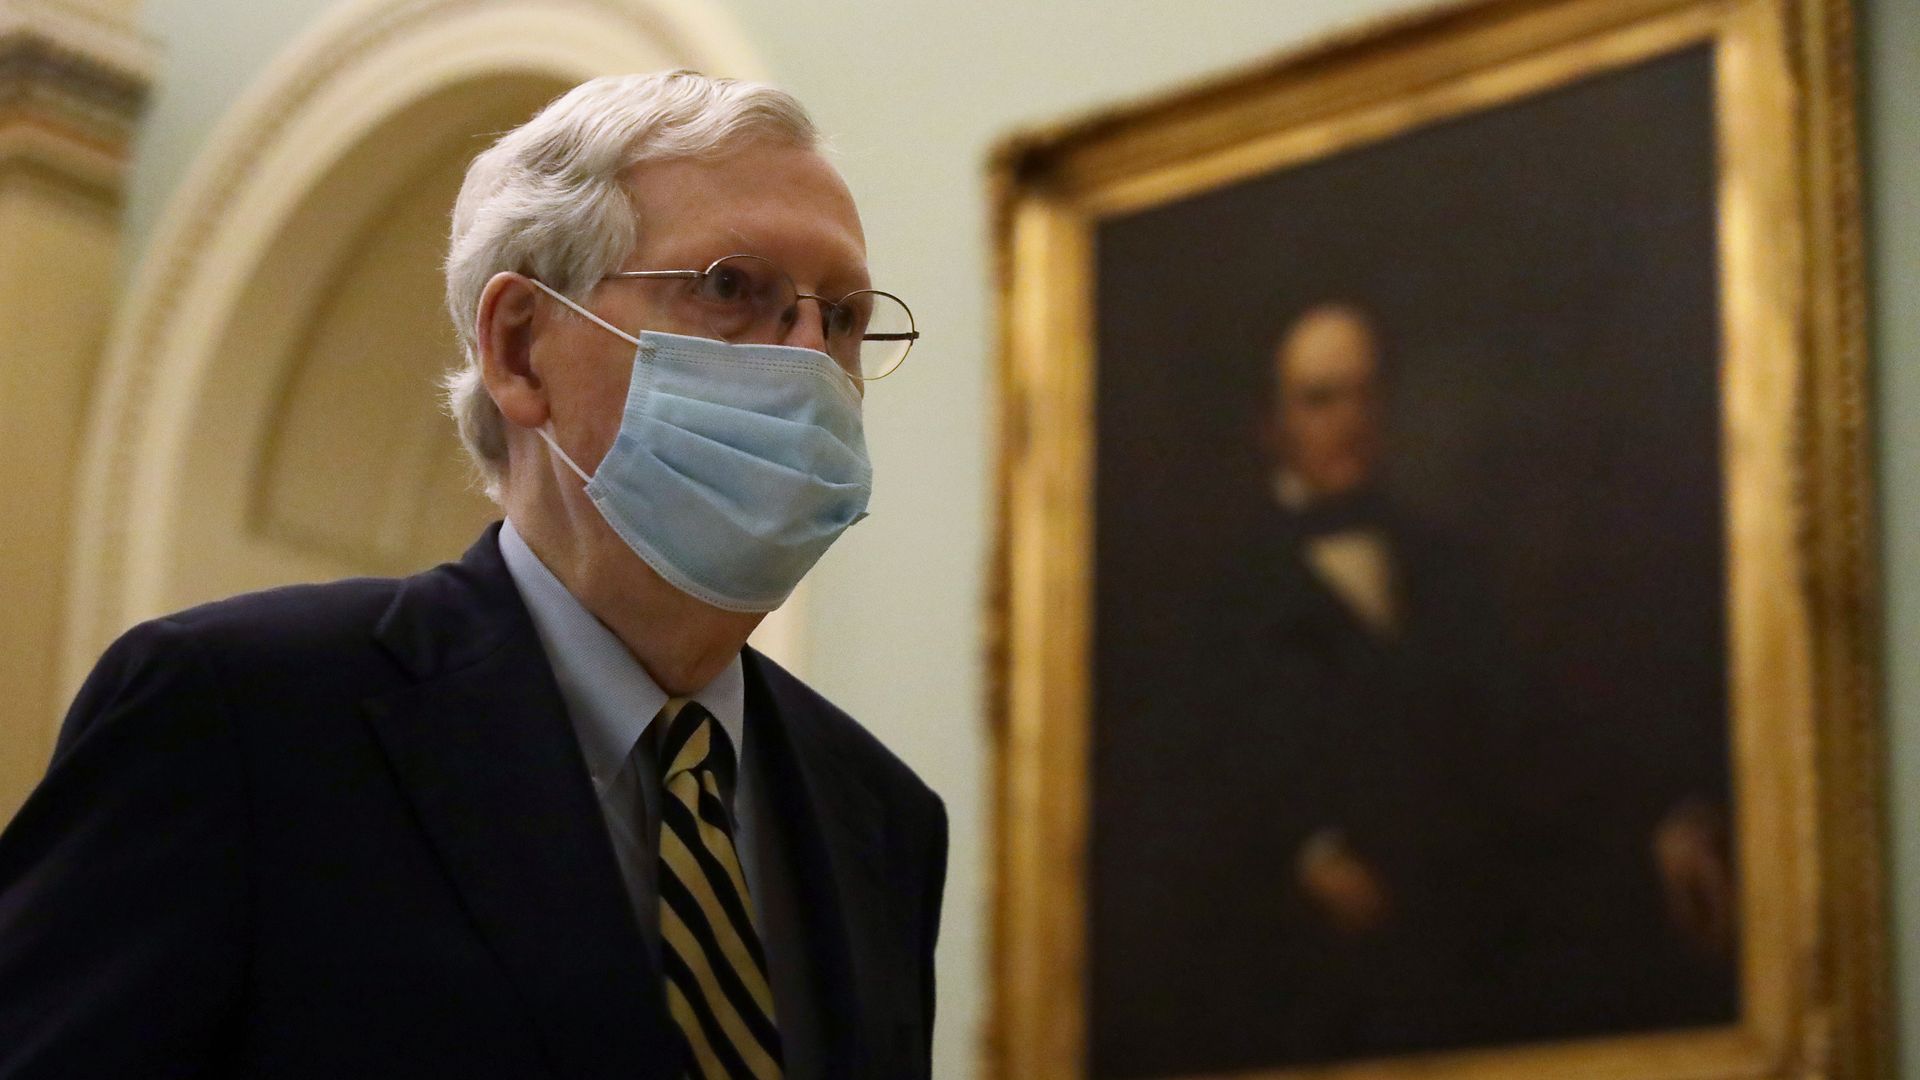 Senate Majority Leader Sen. Mitch McConnell (R-KY) wears a mask as he walks through a hallway at the U.S. Capitol May 11, 2020 in Washington, DC. 